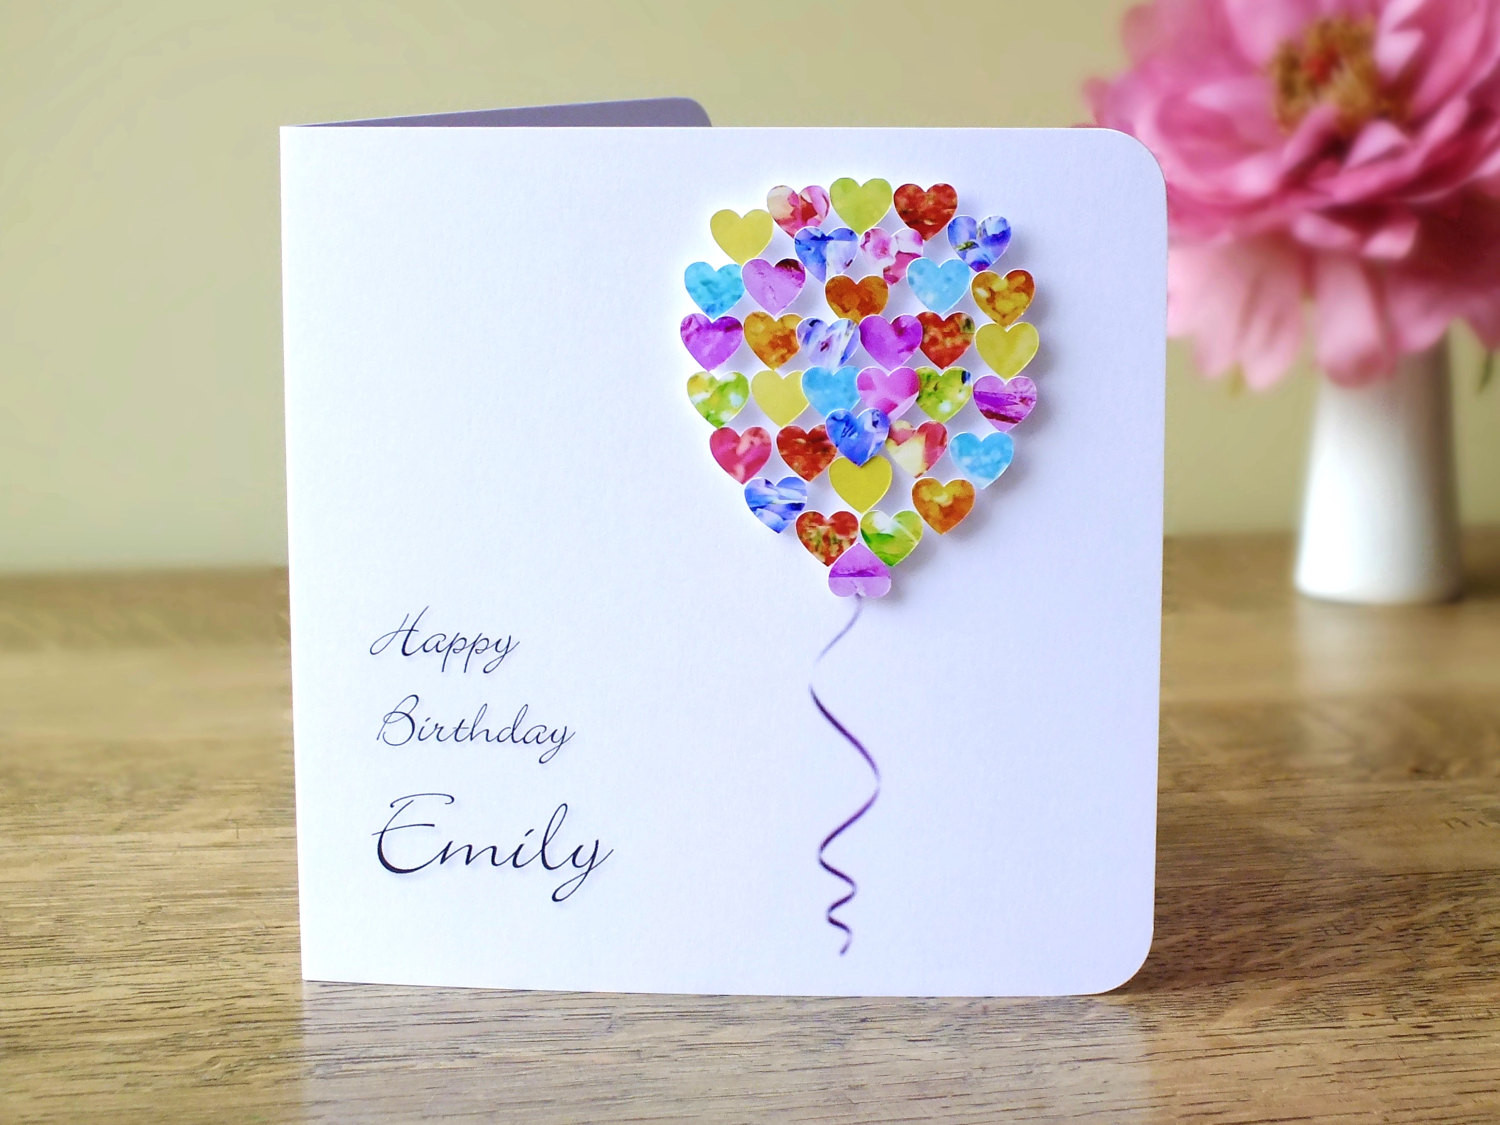 Homemade Birthday Cards For Dad
 Handmade 3D Birthday Card Personalised Colourful Balloons